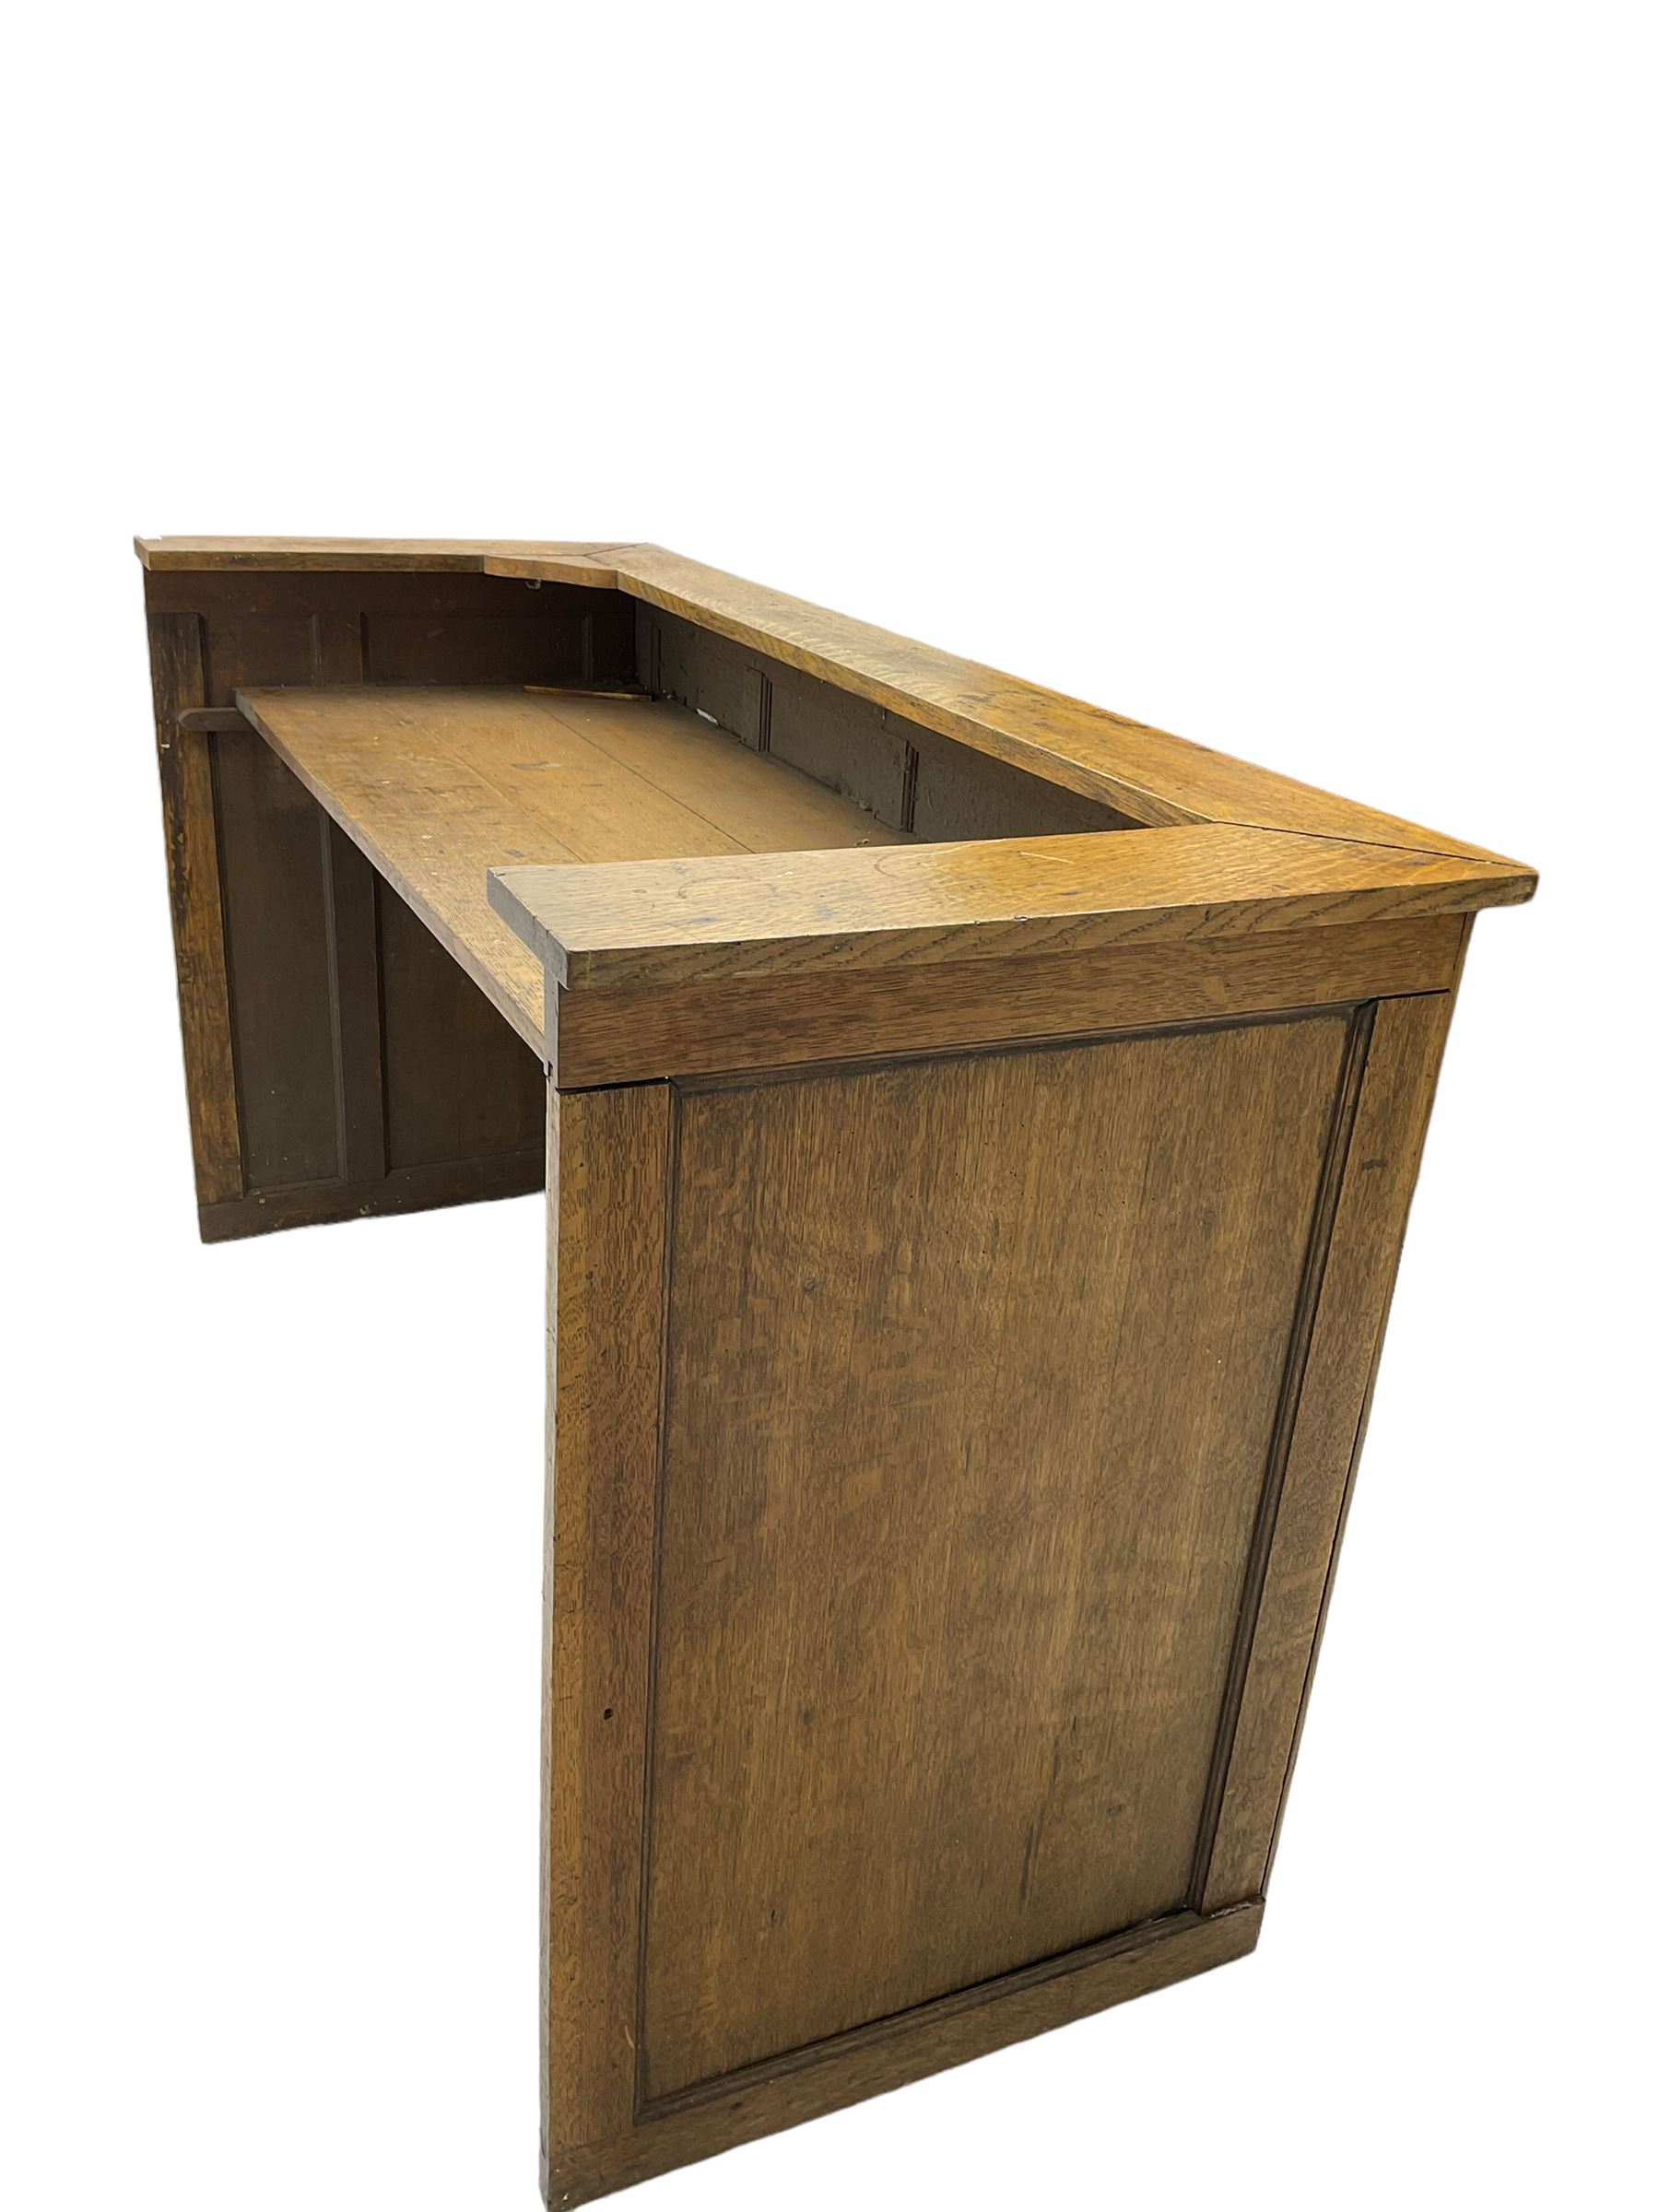 Early 20th century oak rostrum or clerks stand - Image 3 of 7